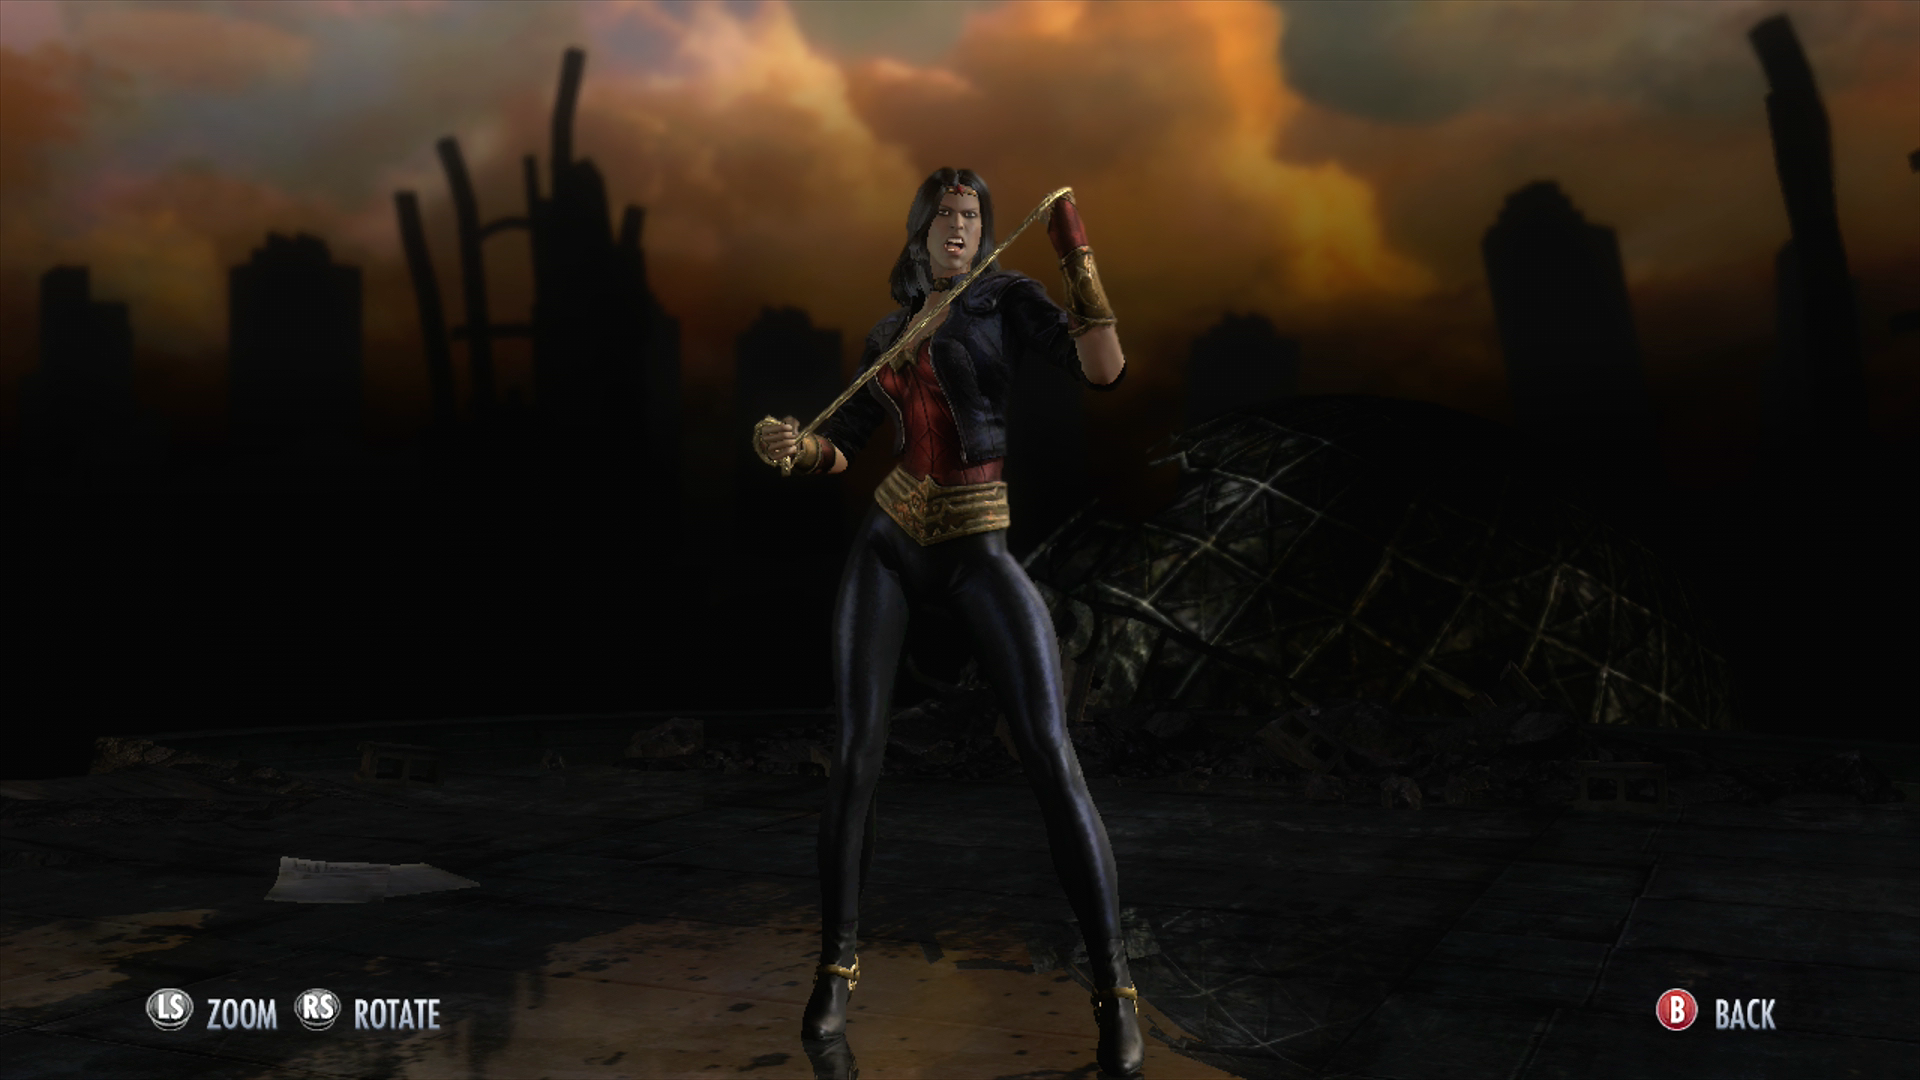 Video Game Injustice: Gods Among Us HD Wallpaper | Background Image